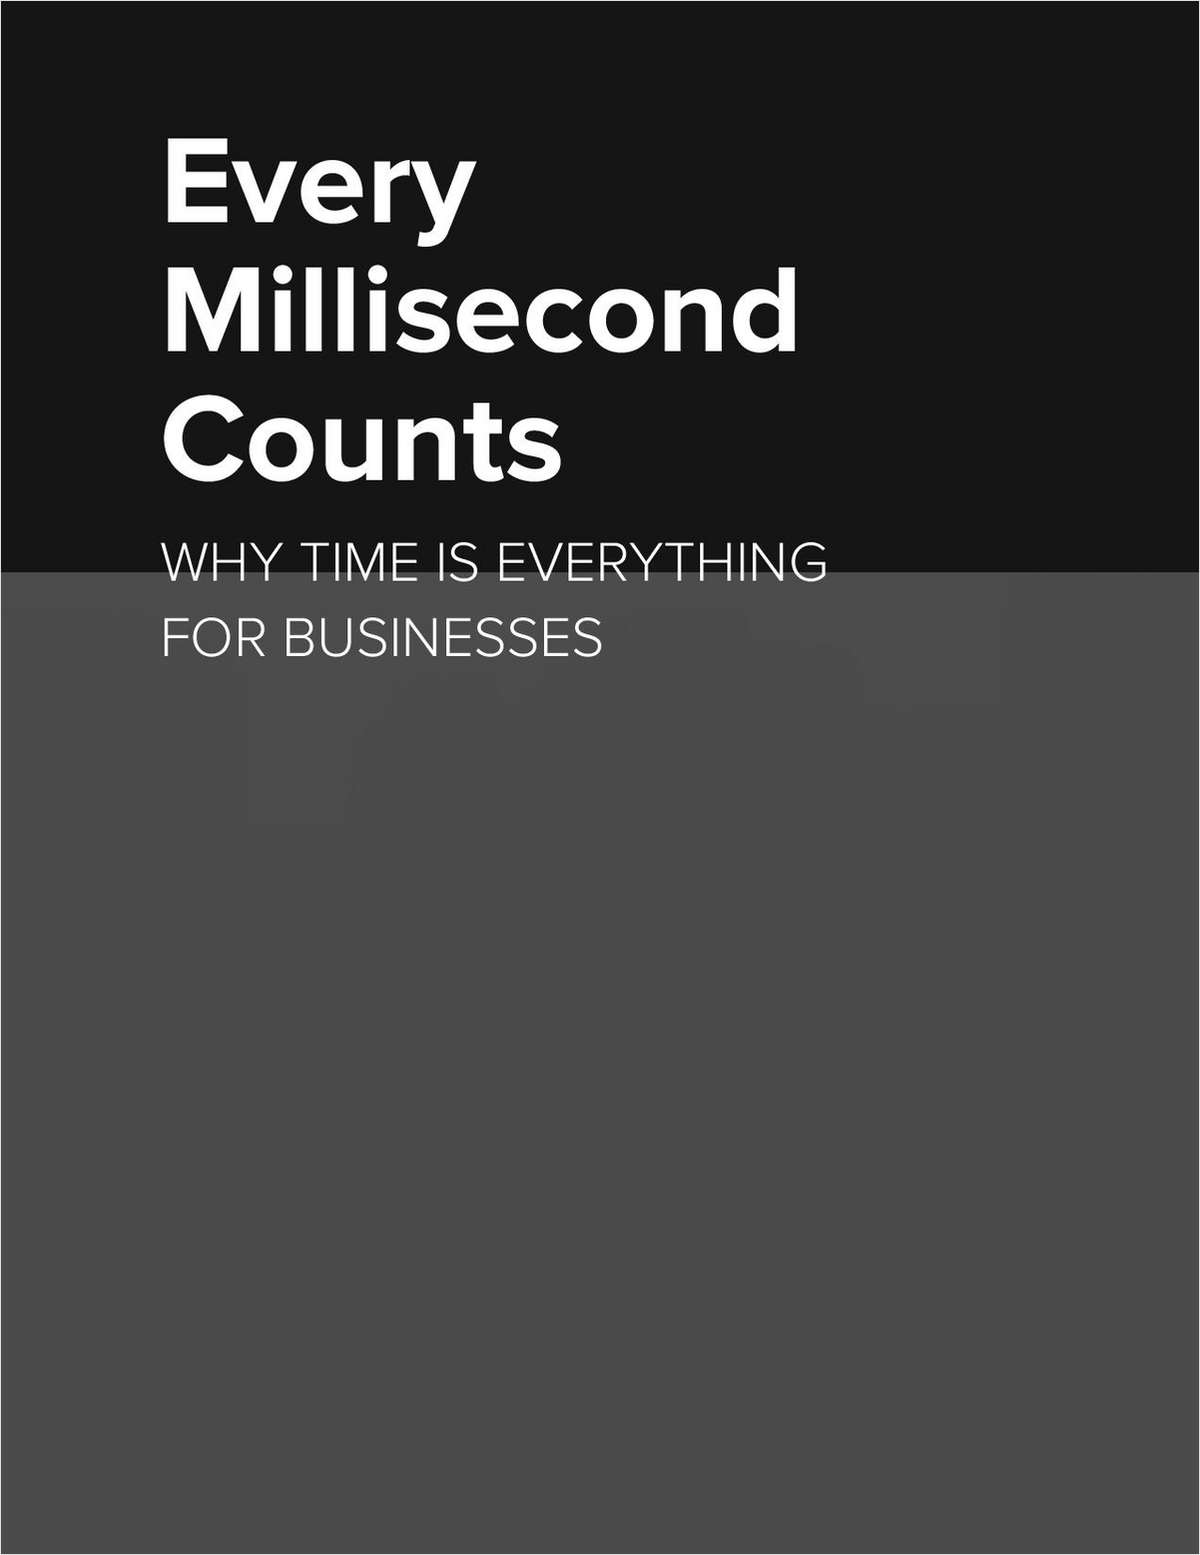 Every Millisecond Counts: Why Time is Everything for Business Screenshot